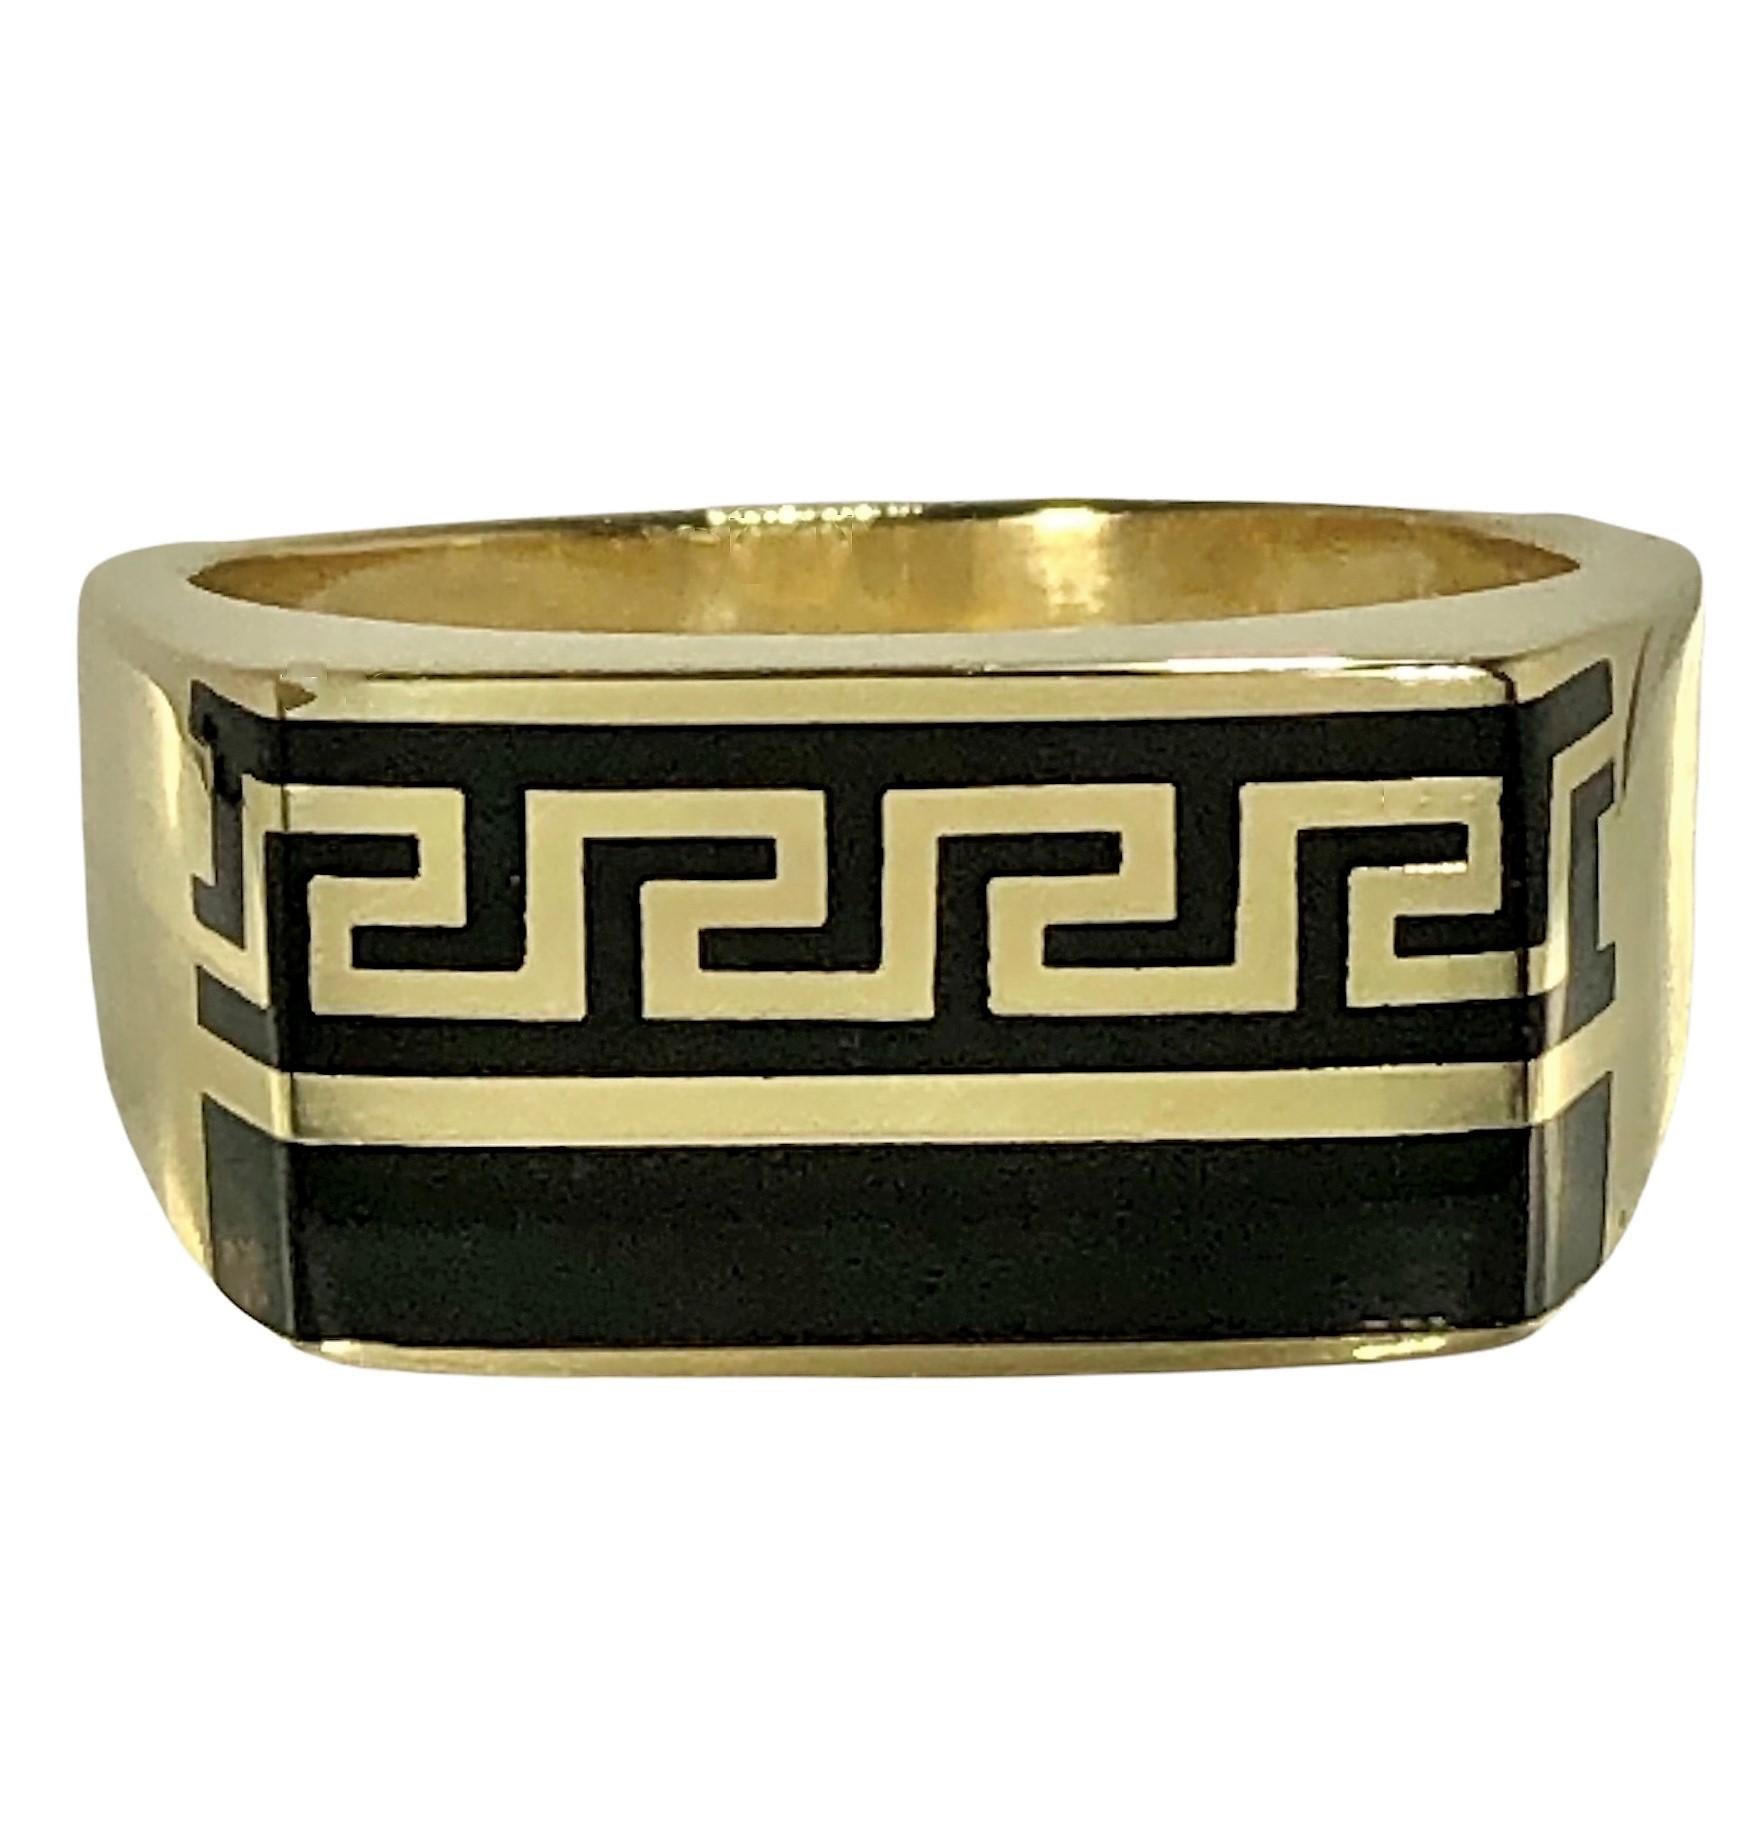 This sharp and tailored 14k yellow gold gents ring with a black enamel Greek Key motif is a true classic. The design area measures 13/16 inches by 7/16 inches and can be worn in two positions, with the Greek key motif on the top or on the bottom. 